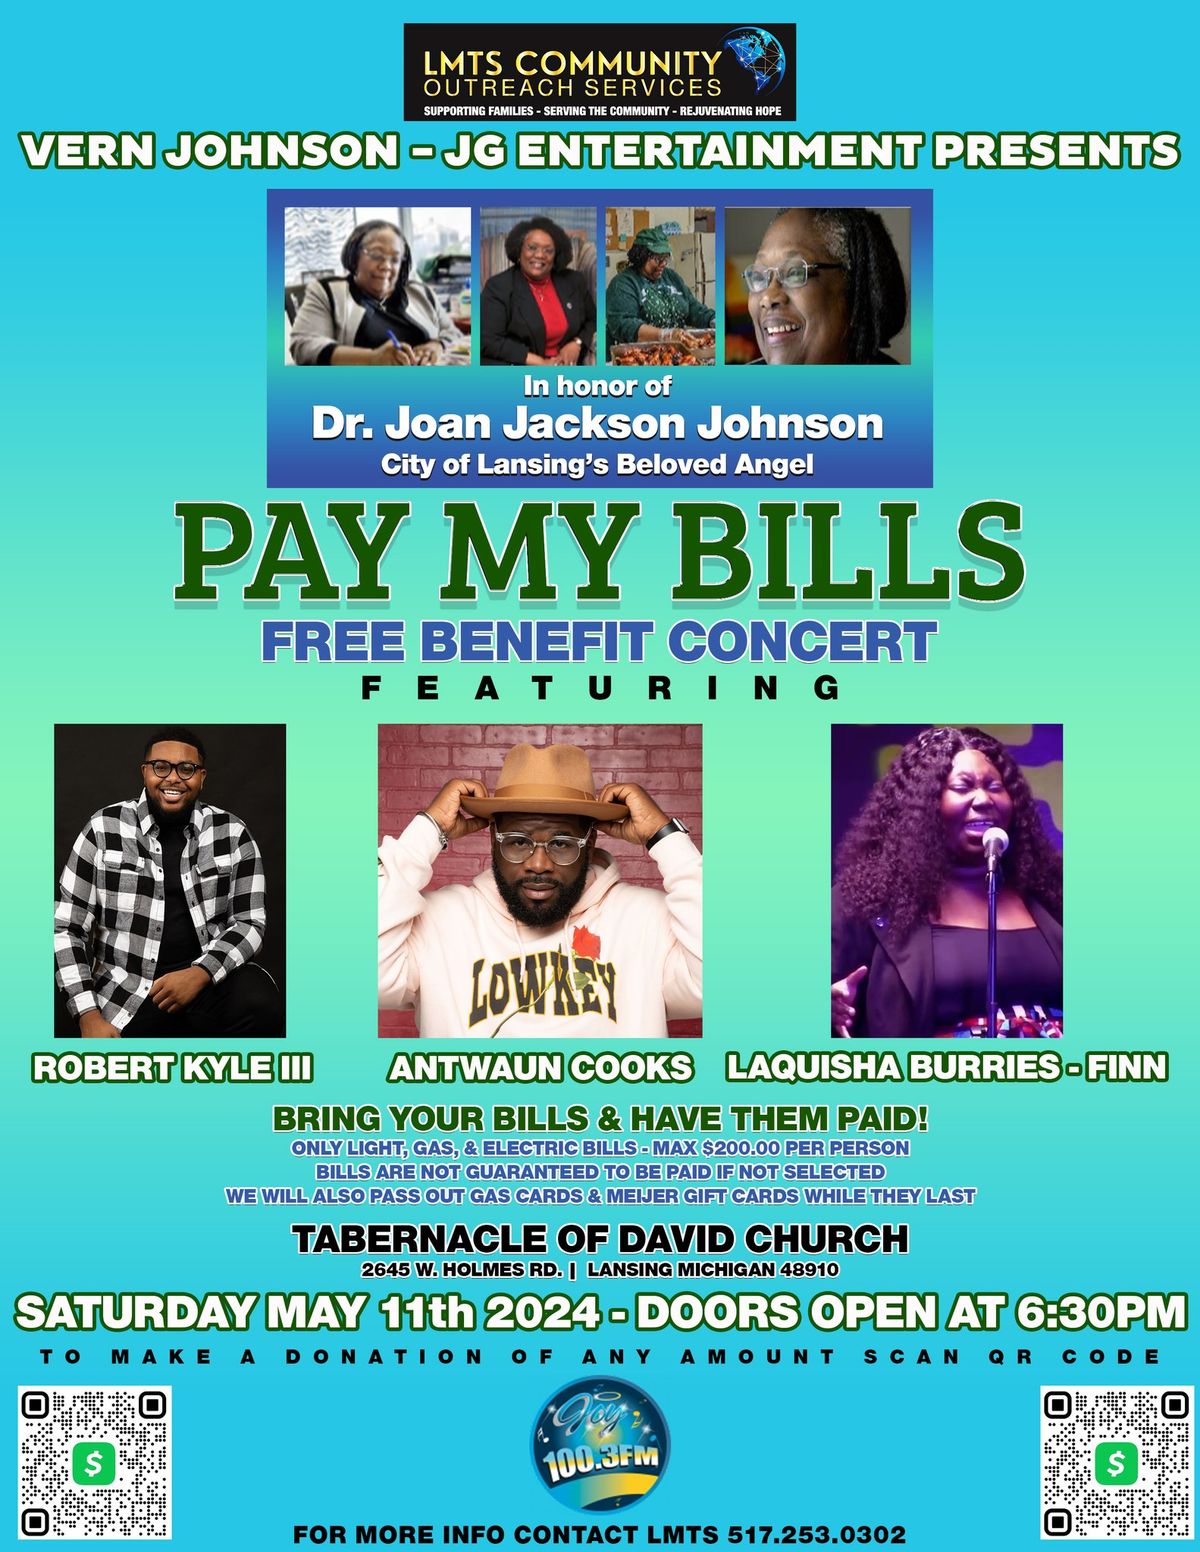 Pay My Bills Benefit Concert in honor of Dr. Joan Jackson Johnson